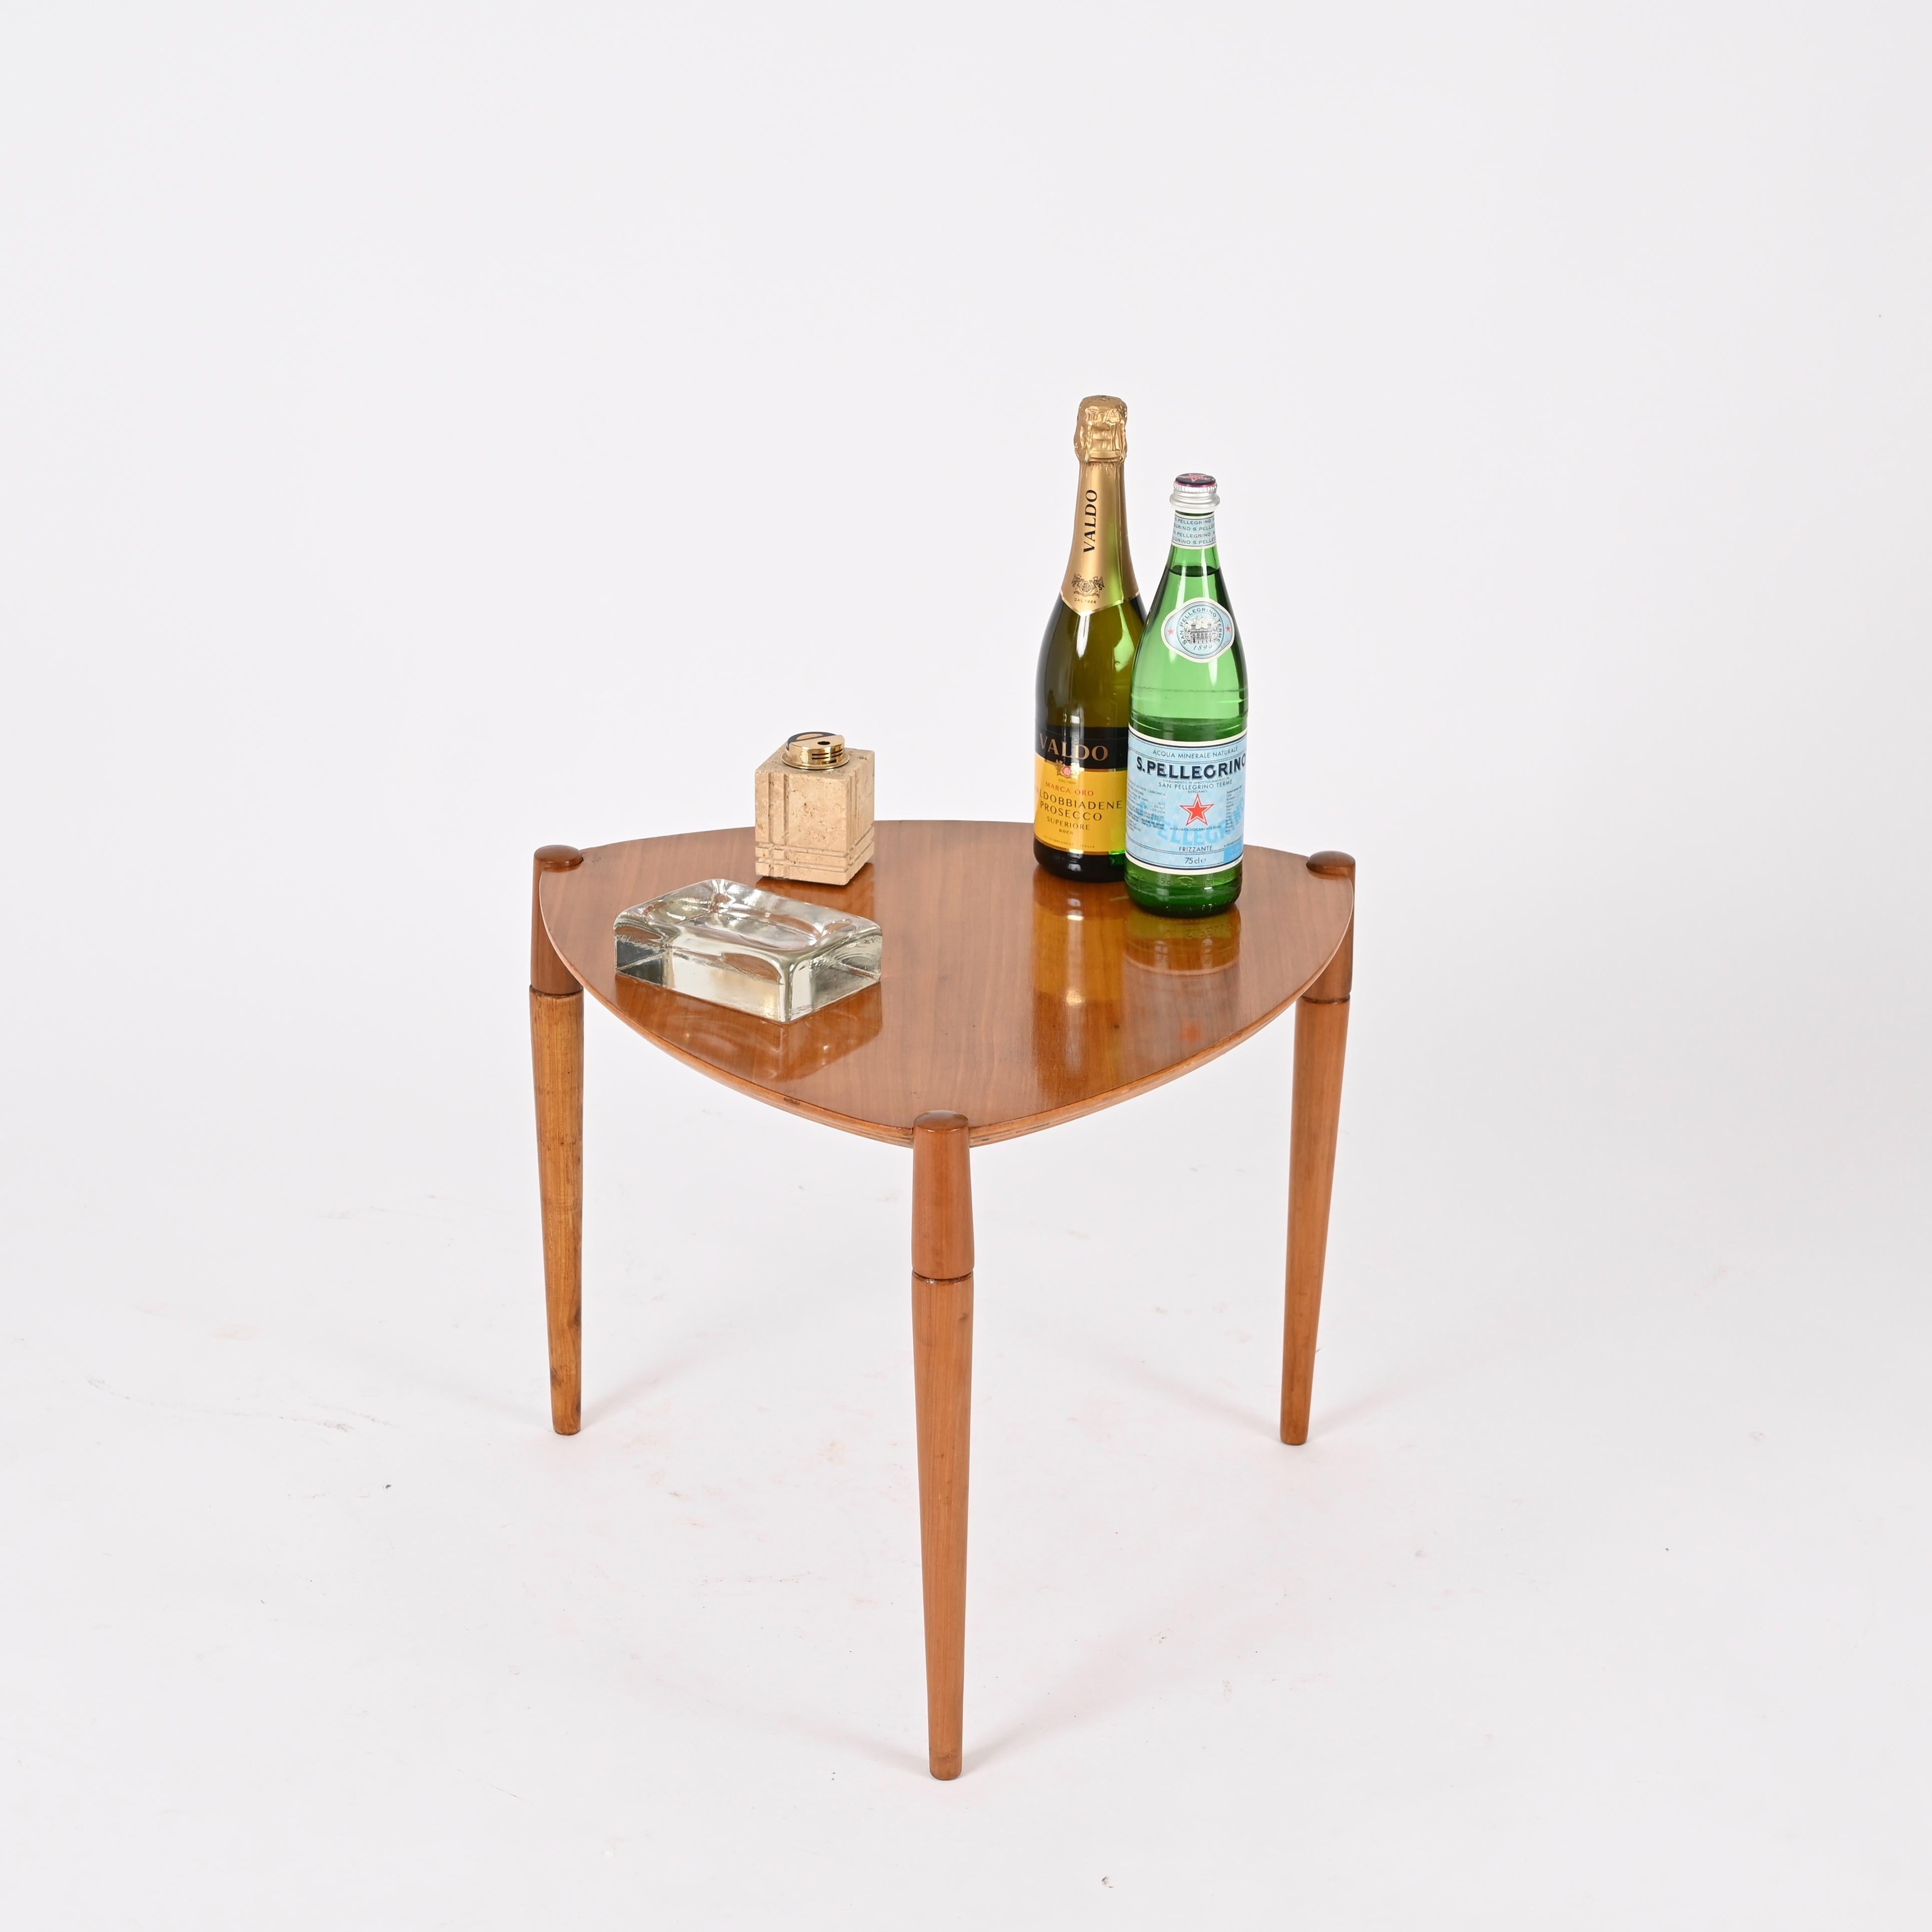 Fantastic Mid-Century coffee table in beech wood. This fantastic object was produced in Italy in the 1960s by the Reguitti Brothers (perhaps for Gio Ponti).

This incredibly elegant coffee or side table is fully made in beech wood with a rounded